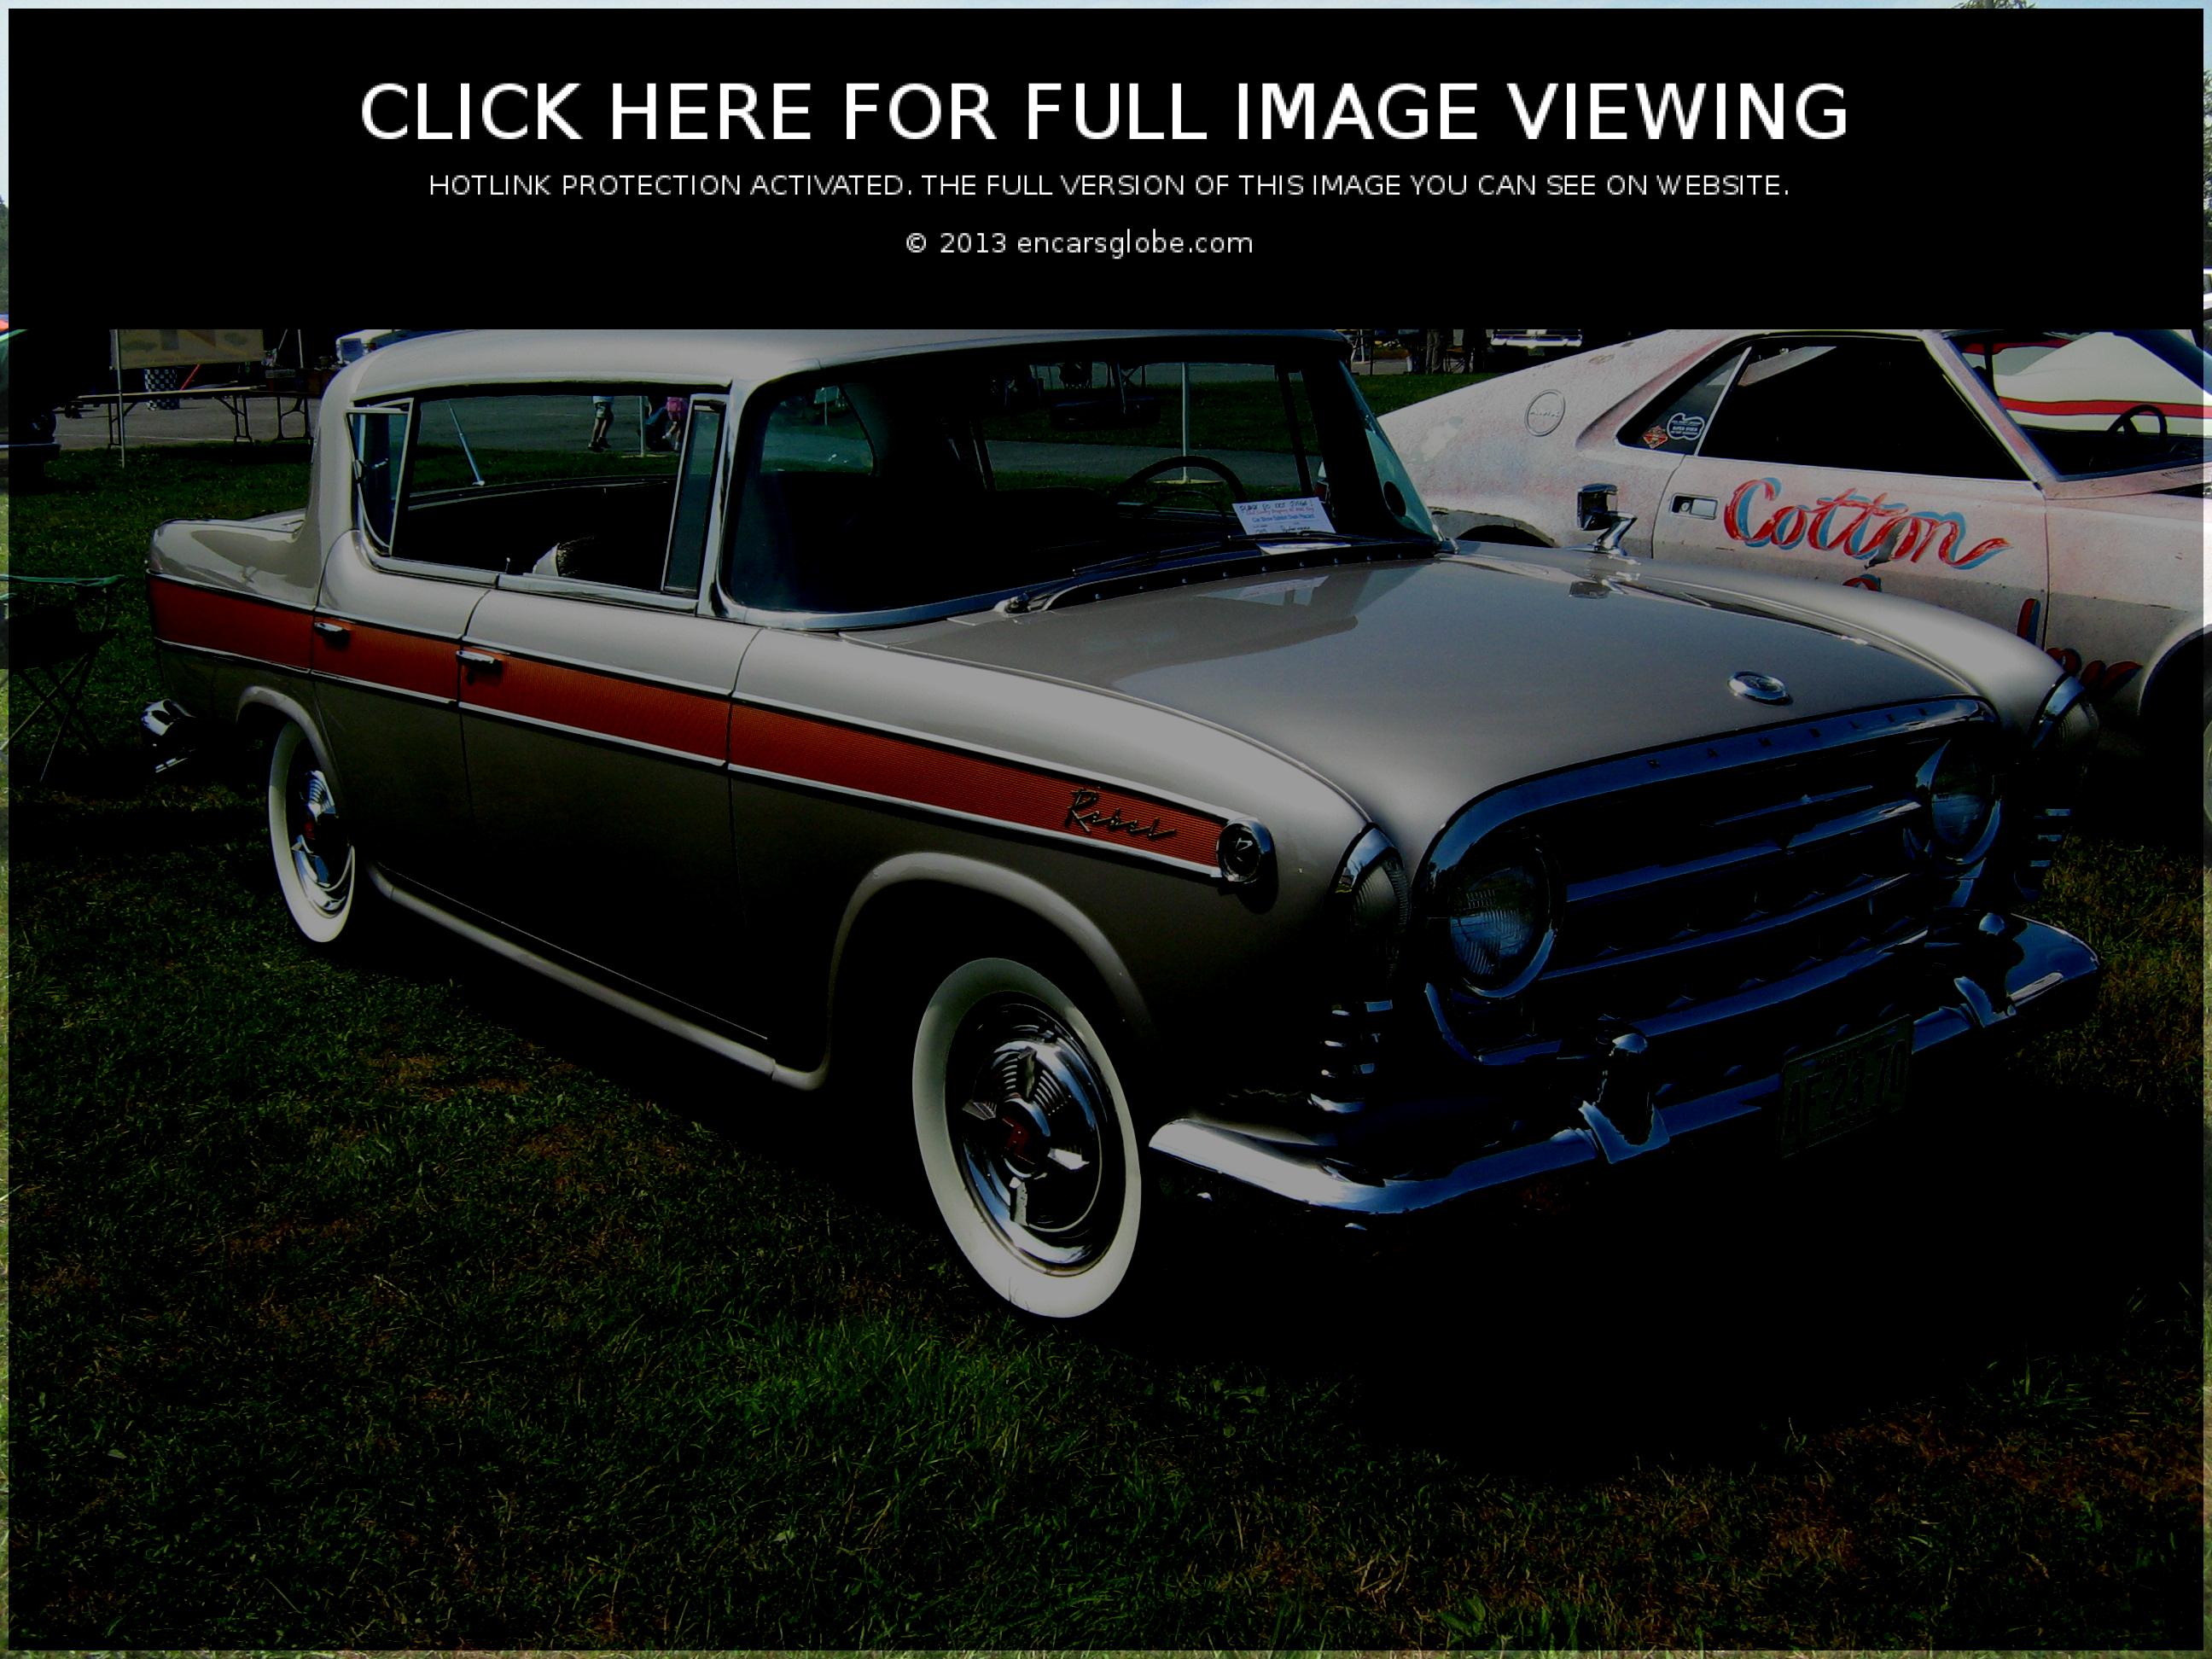 Rambler American 220 4dr Photo Gallery: Photo #12 out of 10, Image ...